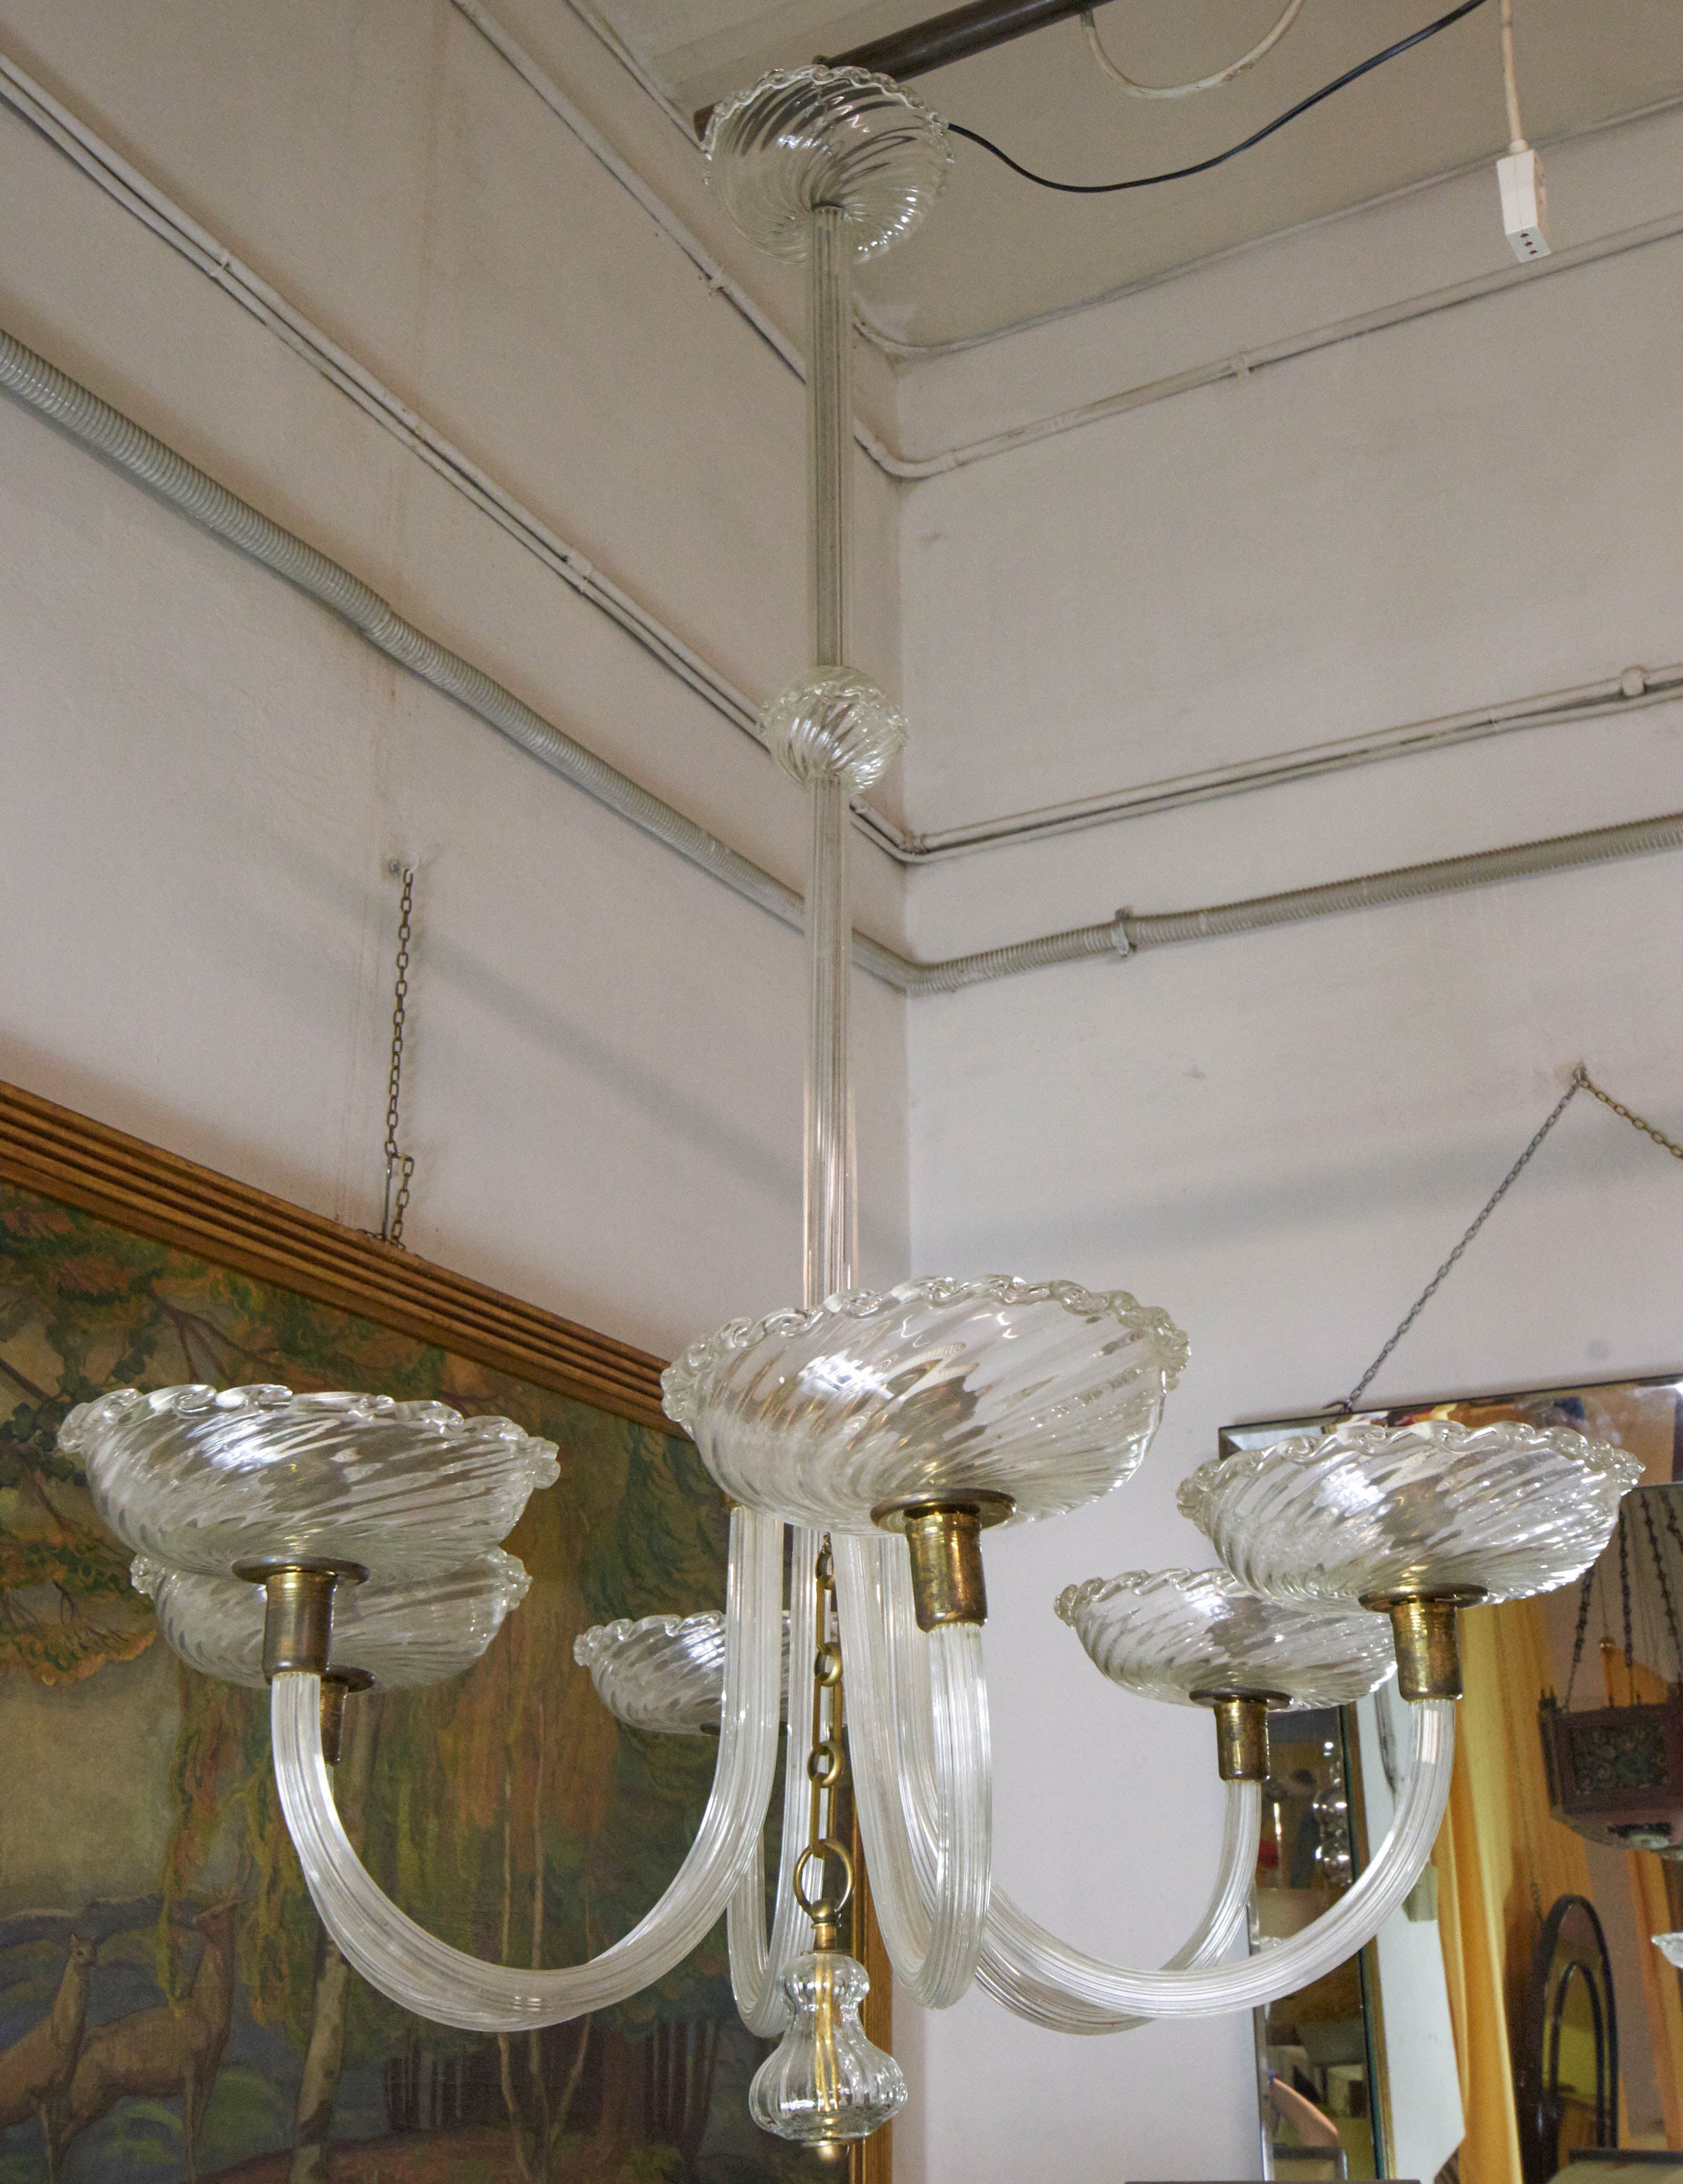 Elegant 1940s chandelier by Barovier. Six-arm and bulbs no colored Murano glass and brass details.
Mid century modern